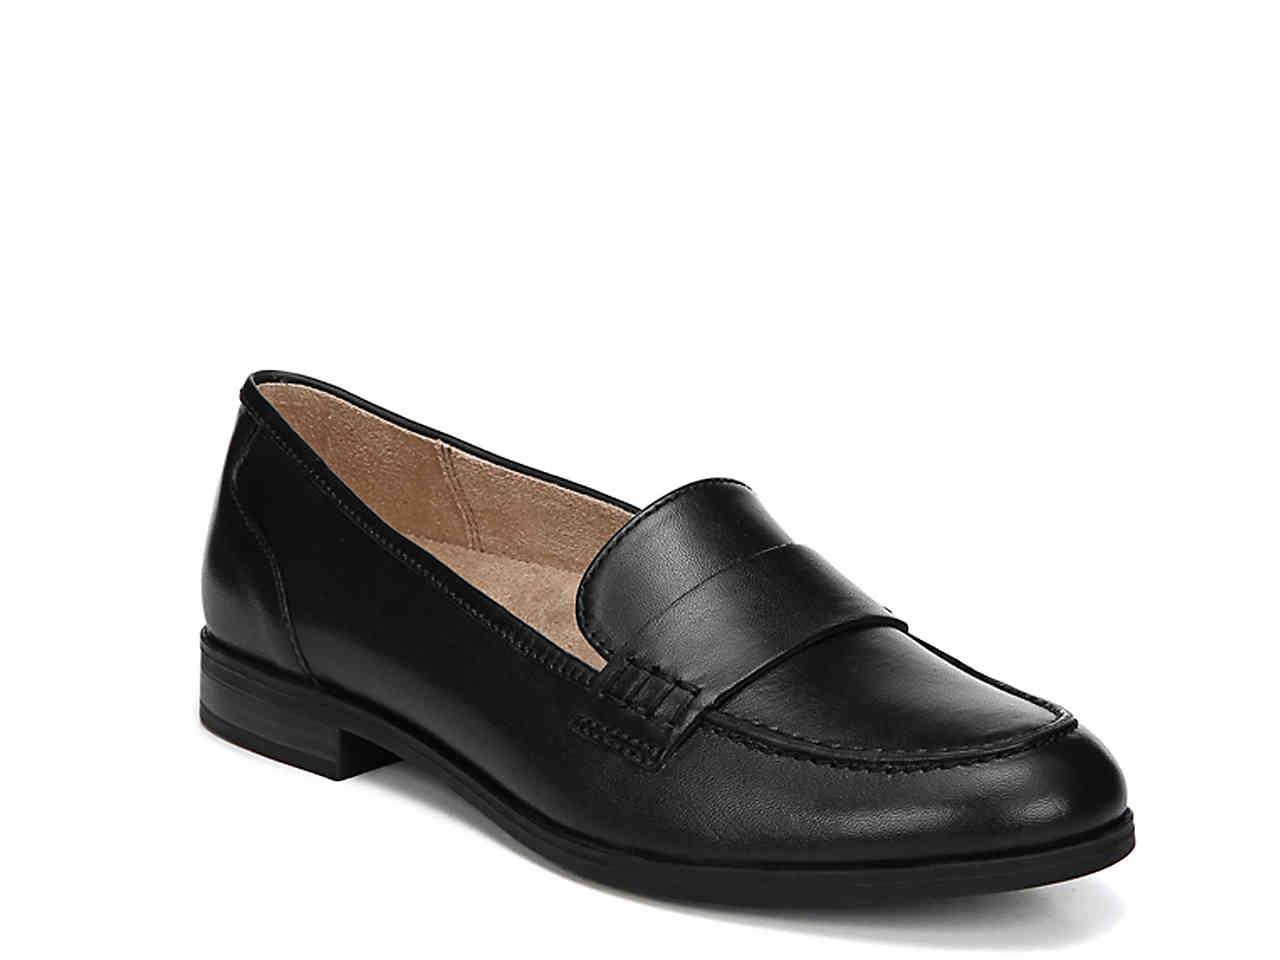 Naturalizer Leather Milo Penny Loafer in Black Leather (Black) - Lyst